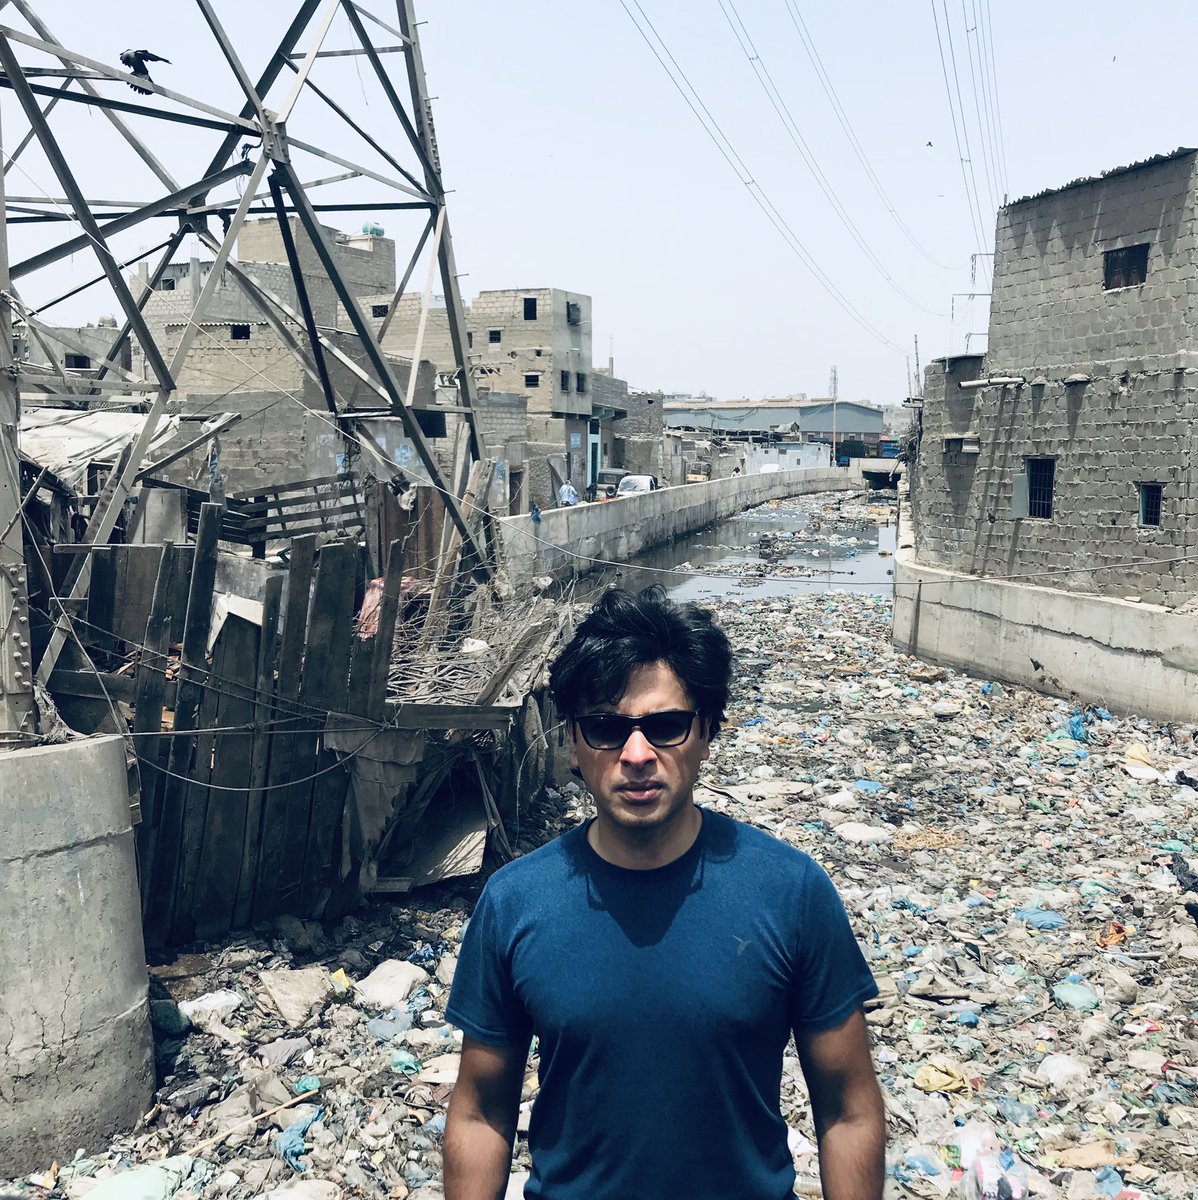 I try everyday to save my city #karachi but according to @TheEIU #karachi has been ranked among the world's most unlivable cities. I don’t know about #karachi but nature/environment  will not forgive us .